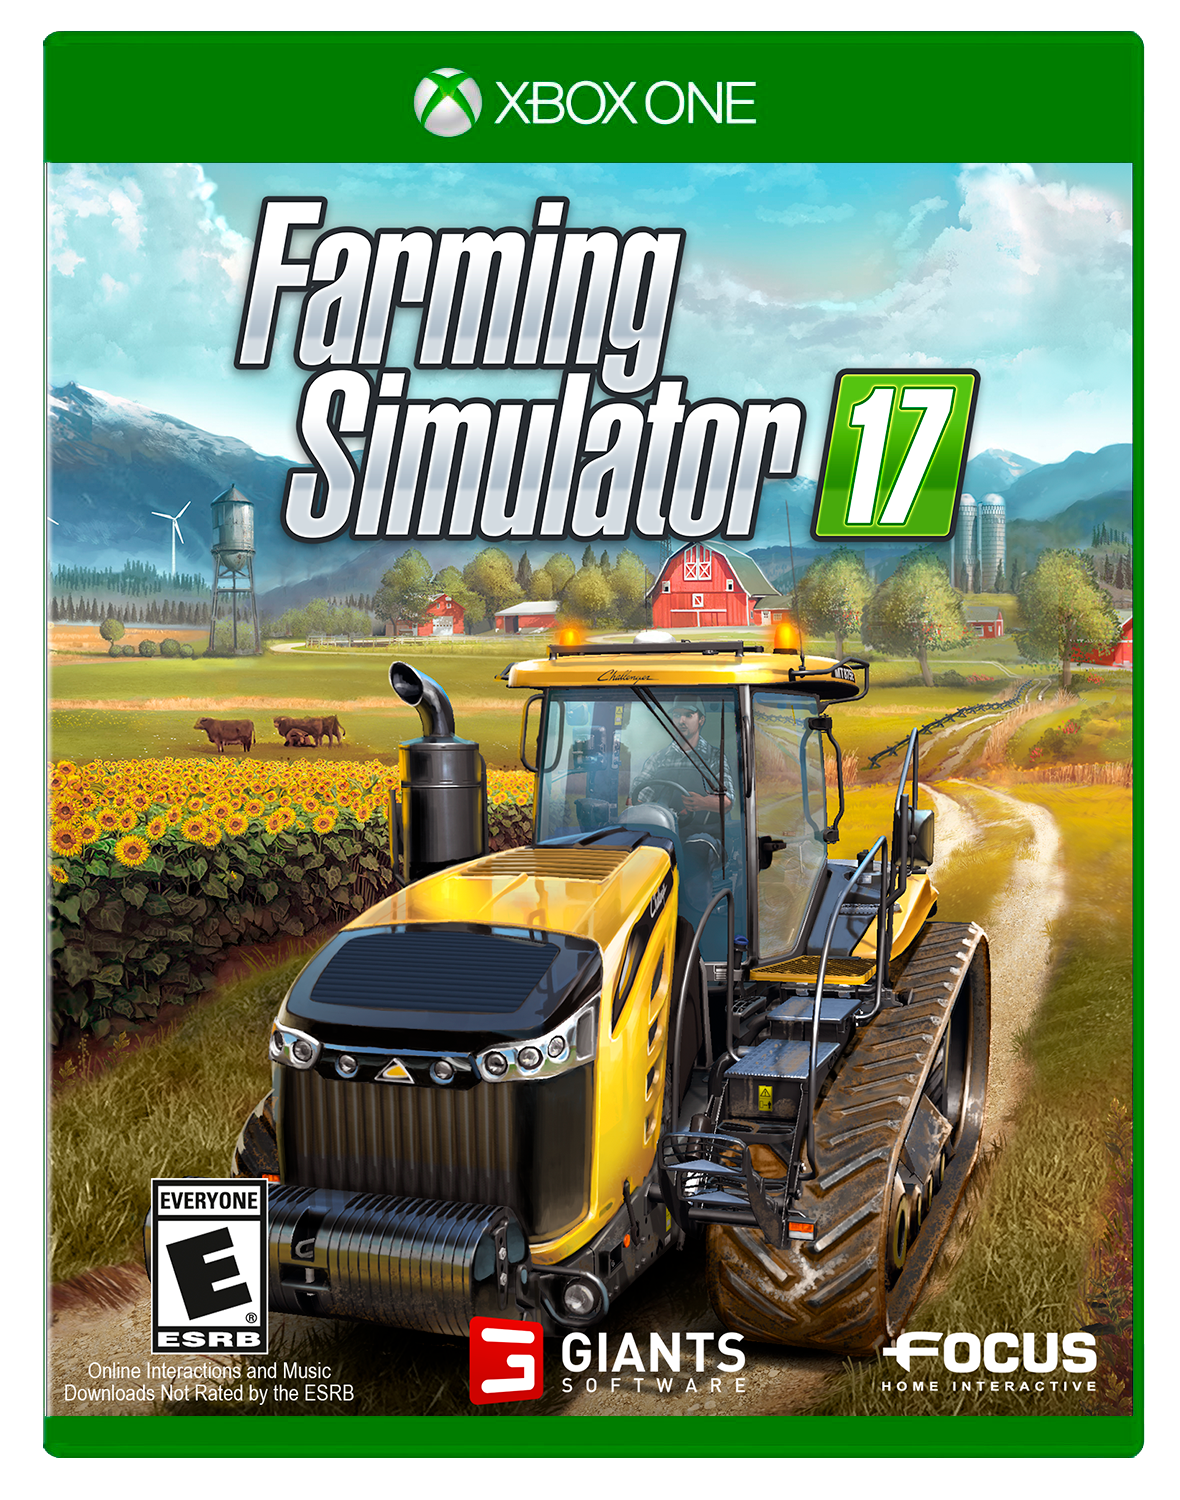 Farming Simulator (Xbox 360) - Very Good Condition - Fast & FREE Delivery